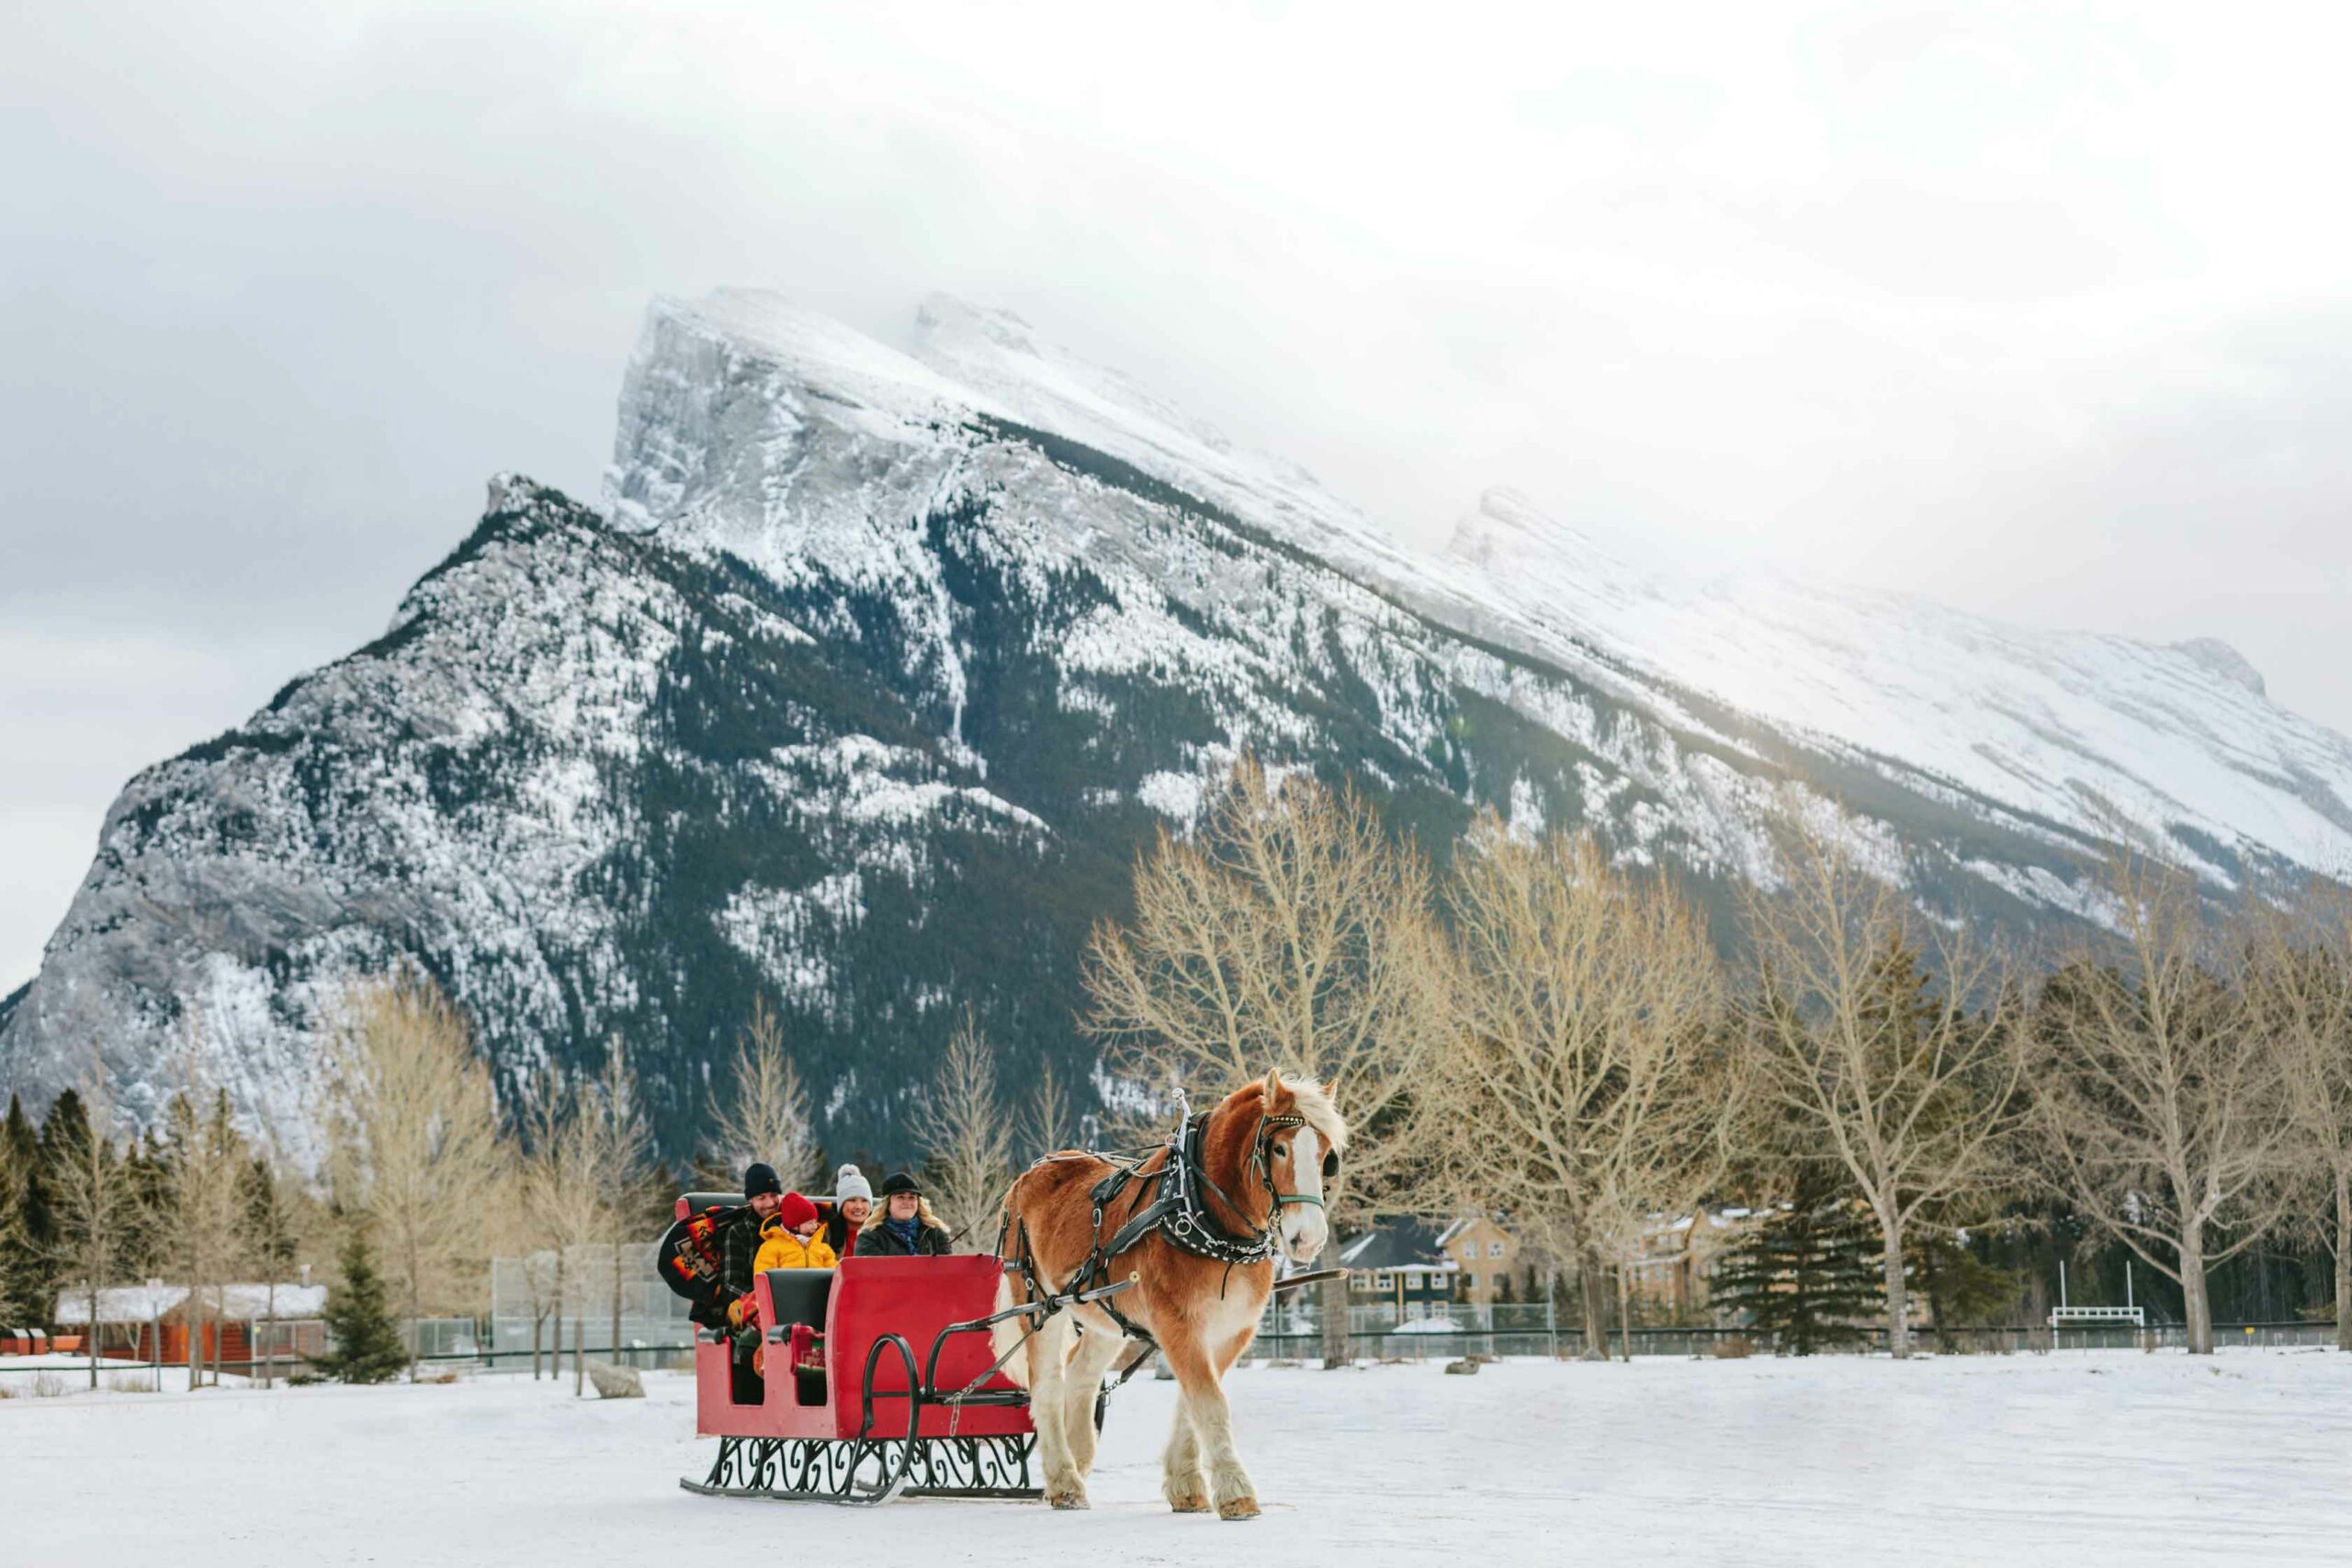 A sleigh ride is a great winter activity in the mountains